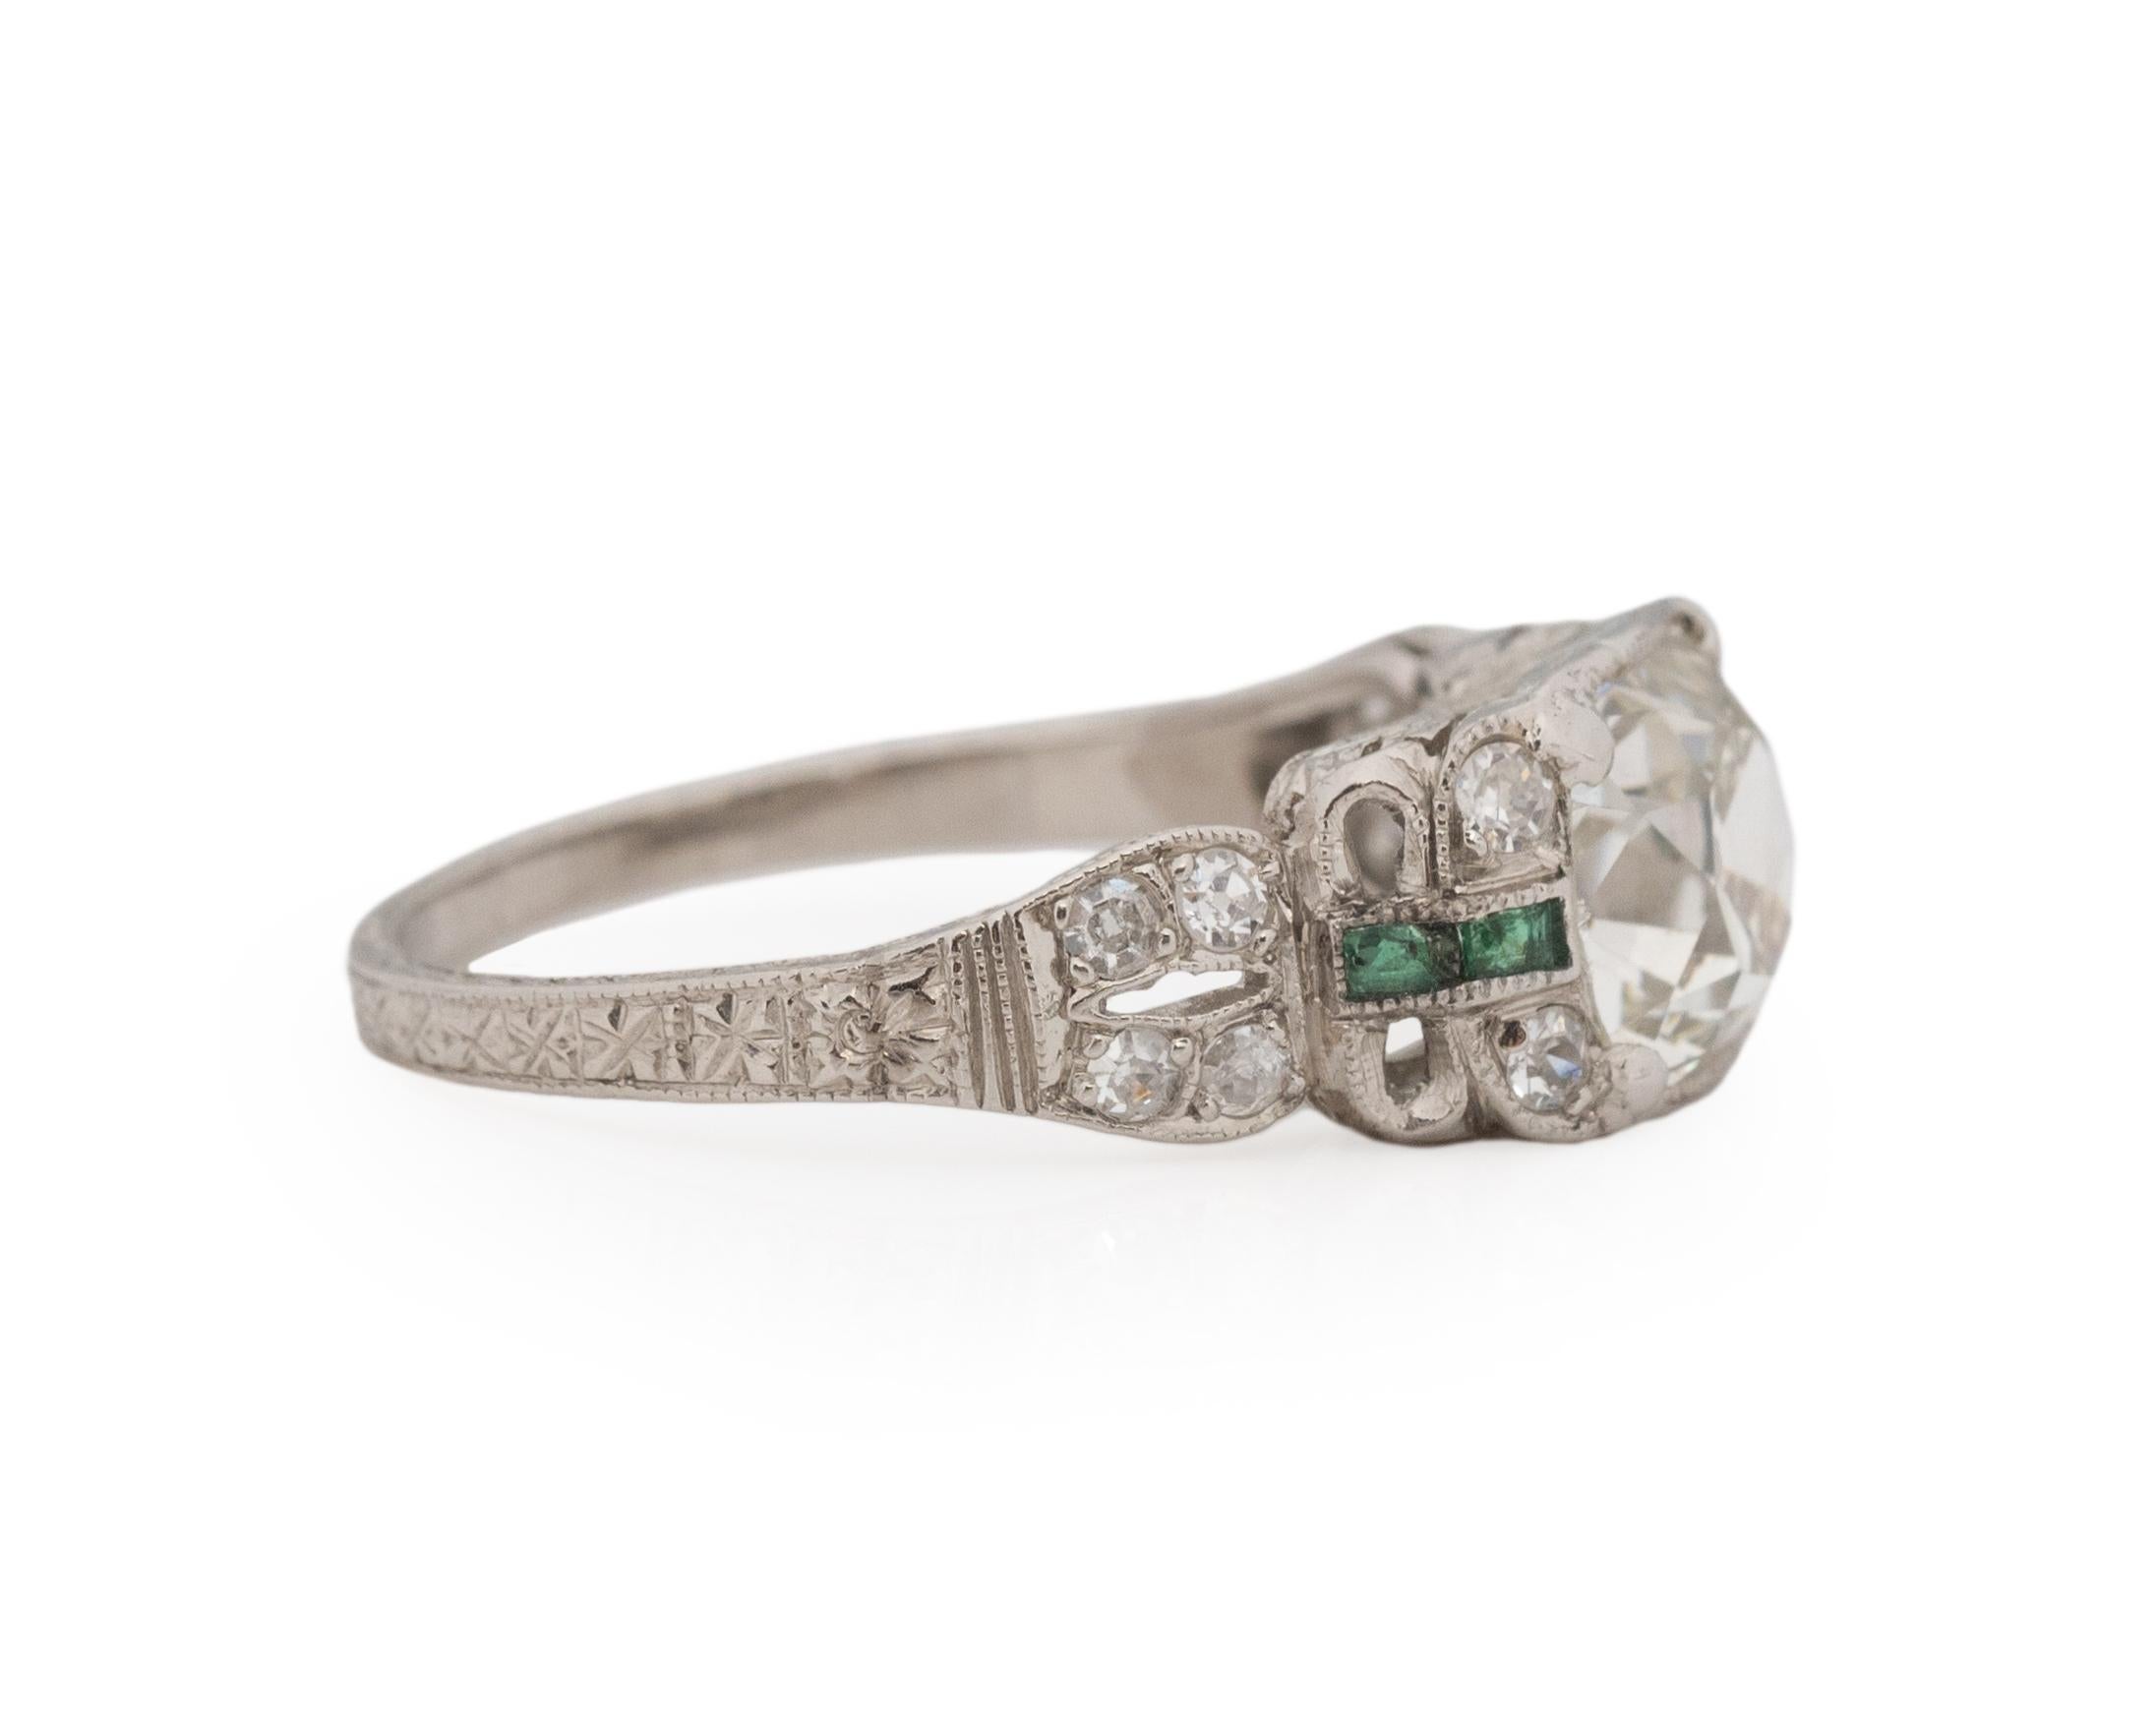 Ring Size: 6
Metal Type: Platinum [Hallmarked, and Tested]
Weight: 3.0 grams

Center Diamond Details:
GIA REPORT #:
Weight: 2.01ct
Cut: Old Mine Brilliant (Antique Cushion)
Color: K
Clarity: SI1
Measurements: 7.78mm x 7.01mm x 4.90mm

Side Stone